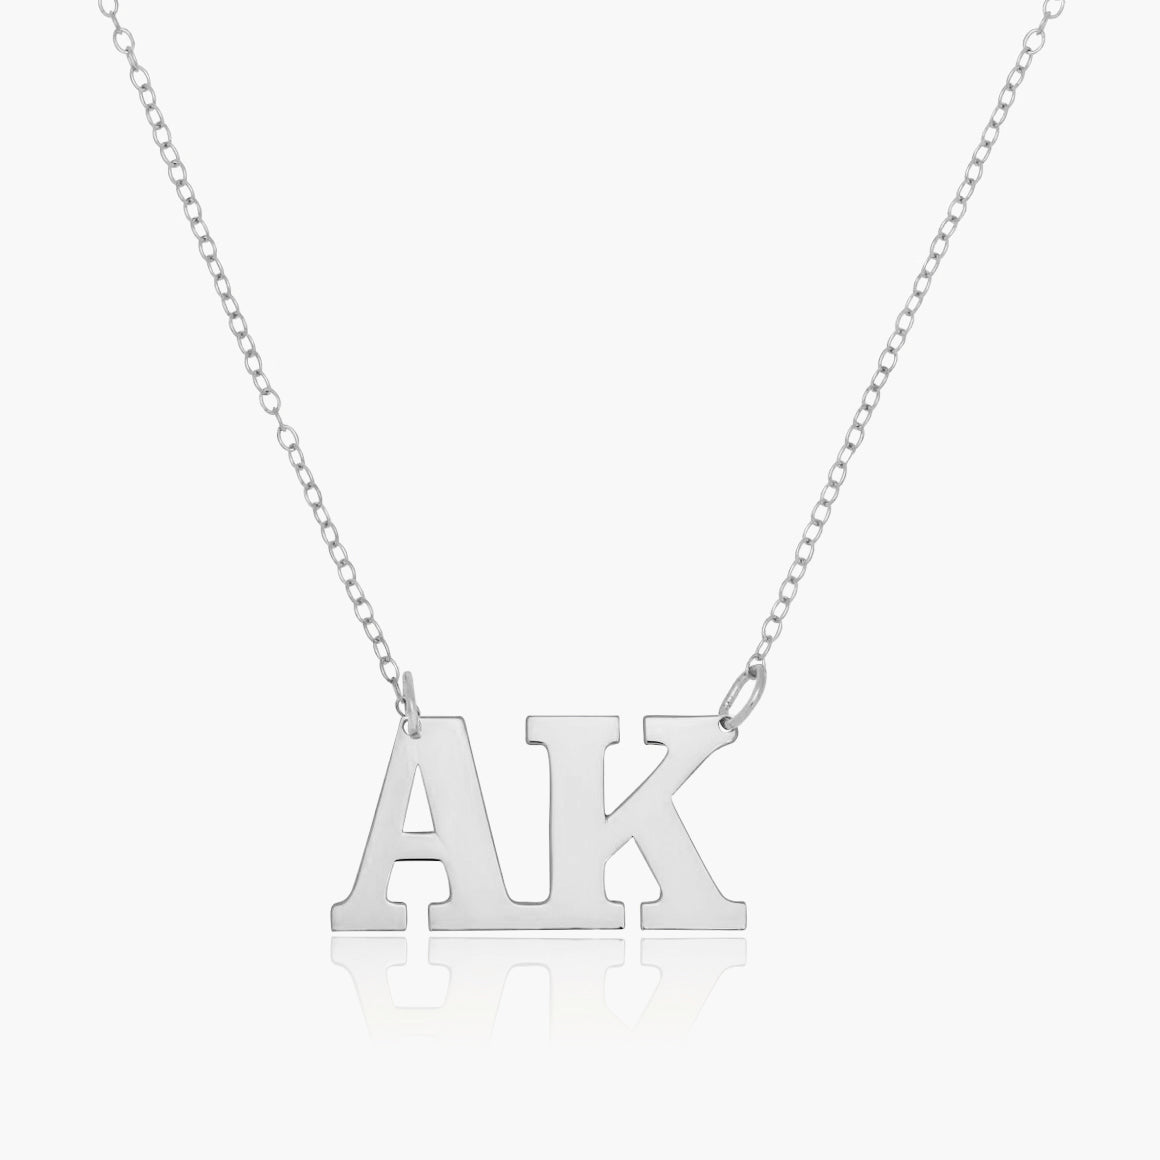 Double Initial Block Necklace